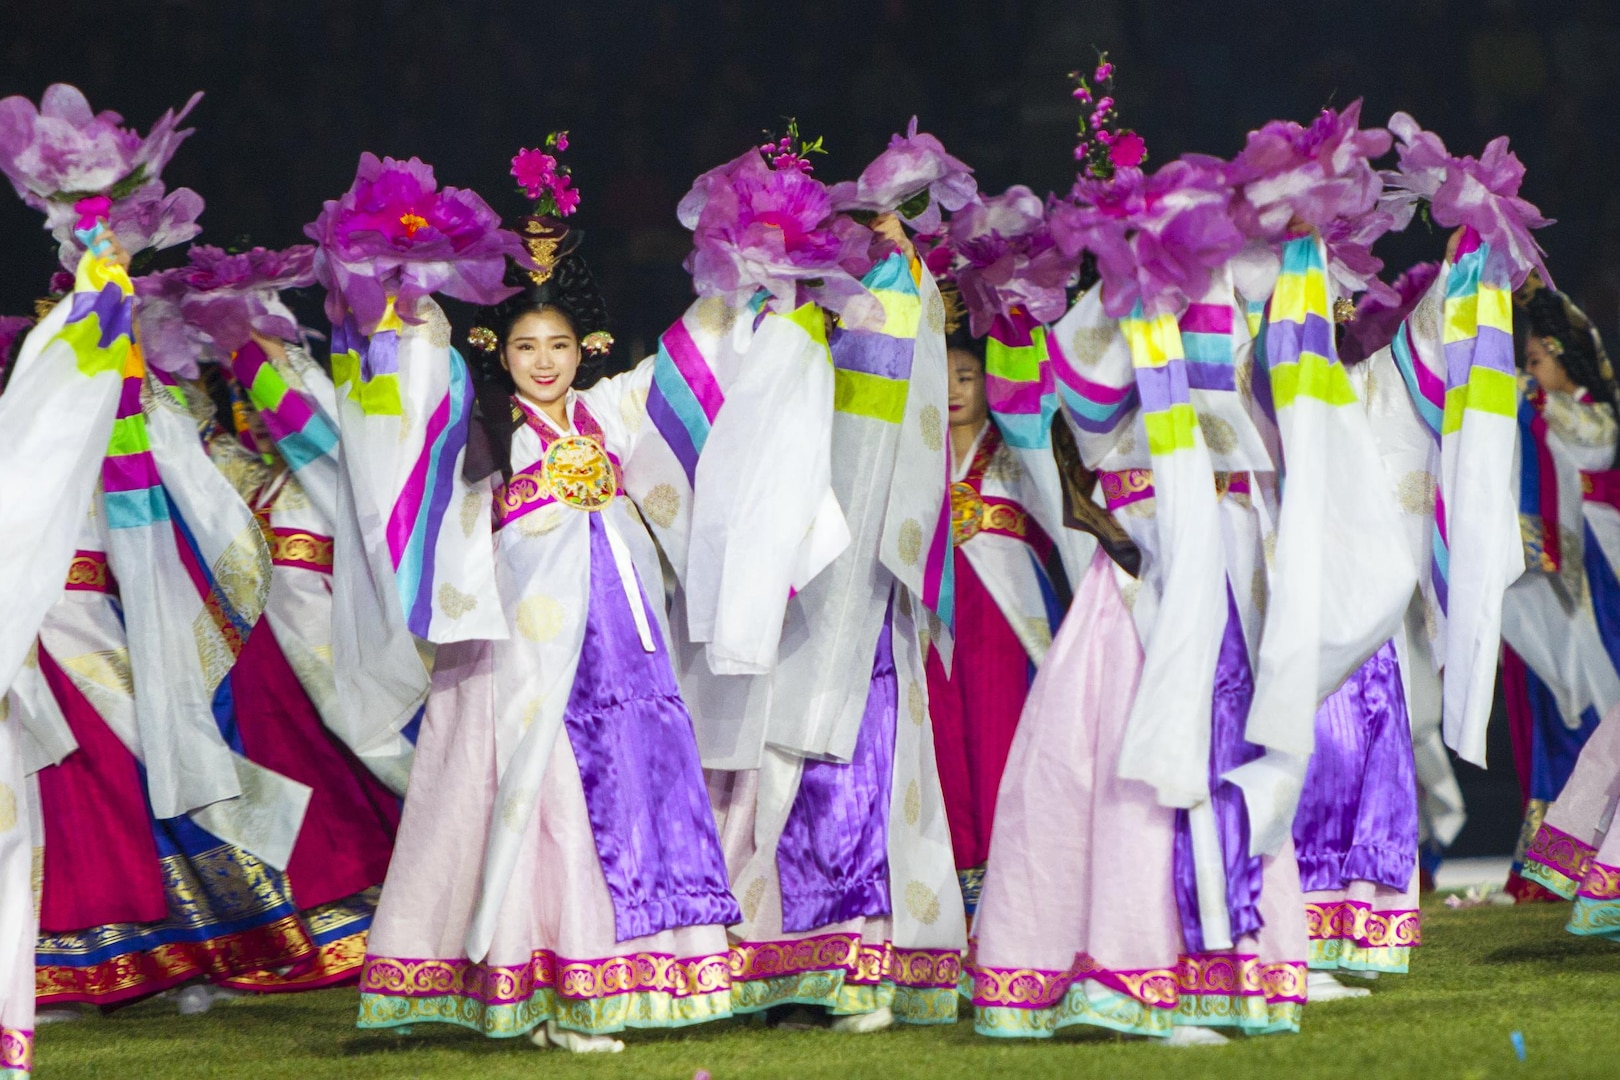 Athletes of over 100 nations joined together in Mungyeong, South Korea, for the Opening Ceremony of the 2015 6th Conseil International du Sport Militaire (CISM) World Games. The ceremony included the marching in of each nation, words from the president of South Korea and many Korean cultural dances. The CISM World Games provides the opportunity for the athletes of these nations to come together and enjoy friendship through sports. The sixth annual CISM World Games are being held aboard Mungyeong, South Korea, Sept. 30 - Oct. 11.